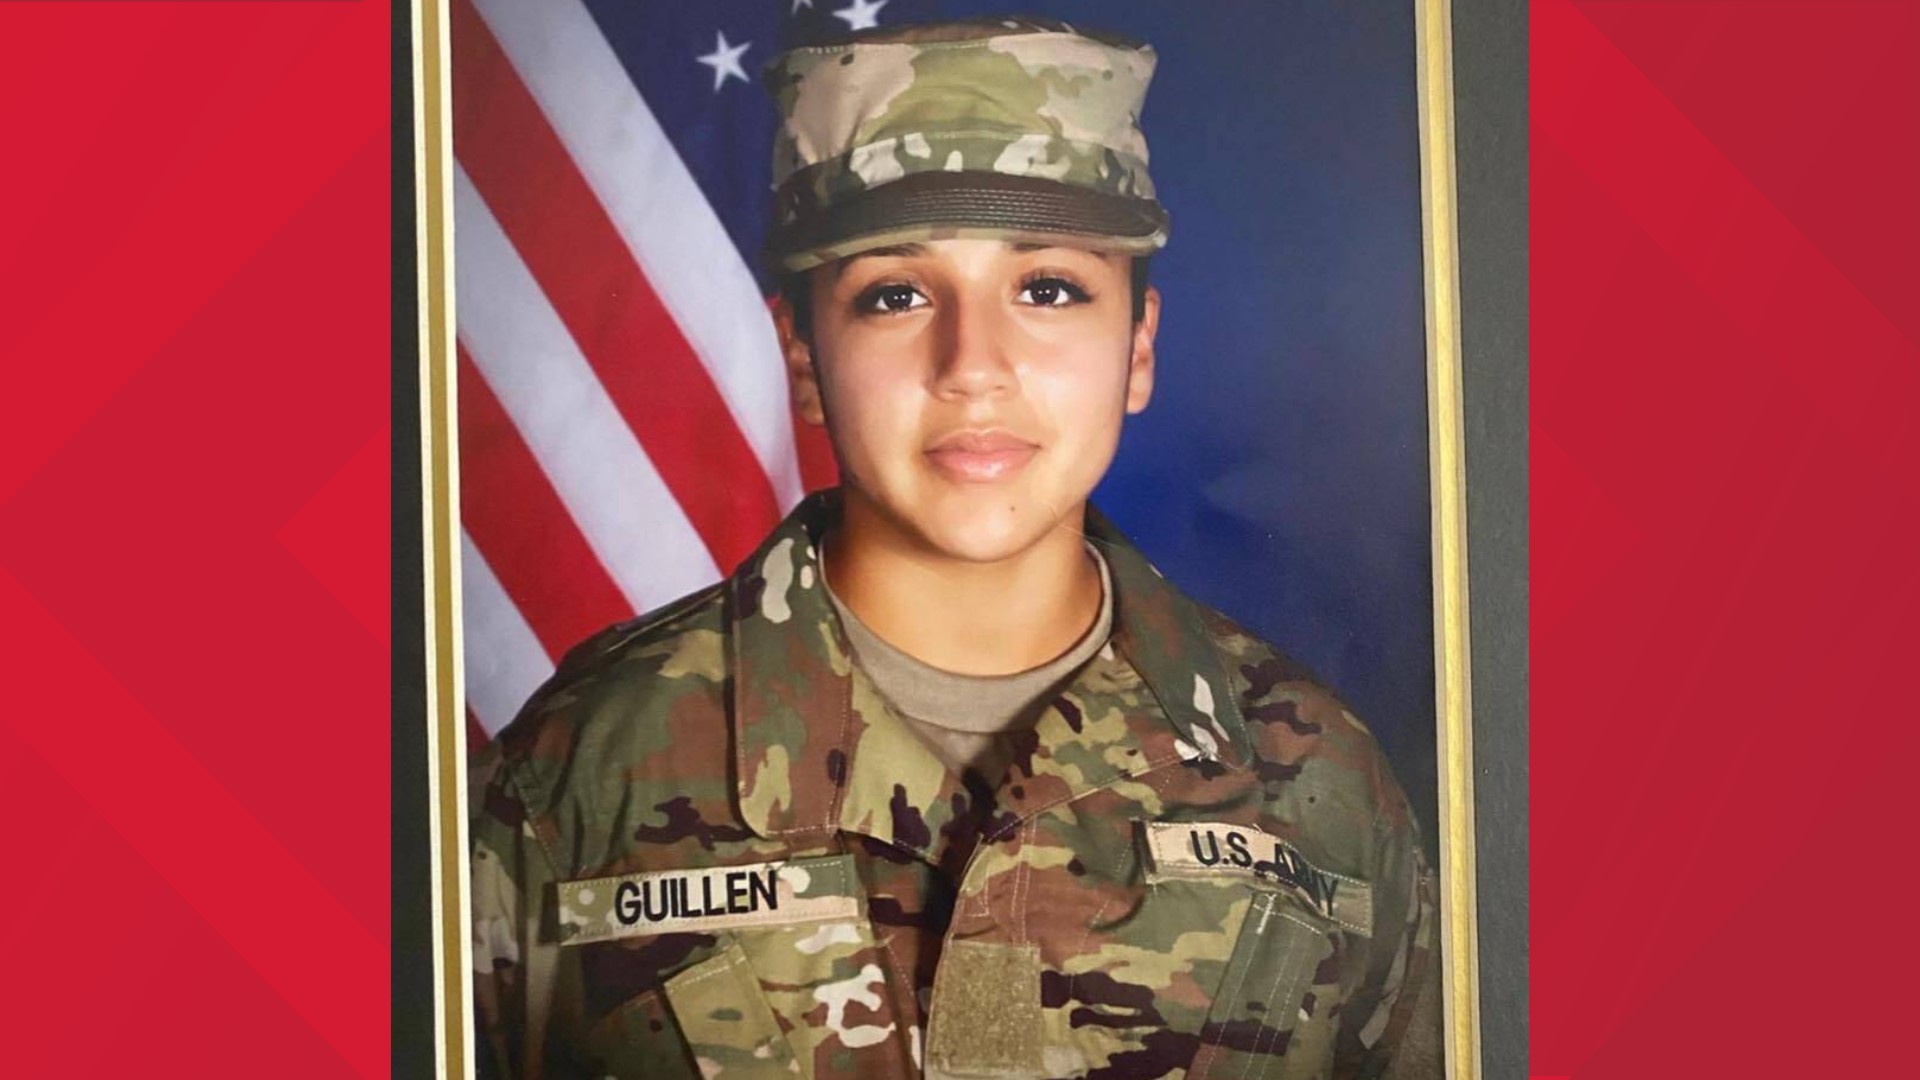 The Fort Hood Army CID launched the search for Vanessa Guillen Sunday after getting a tip.